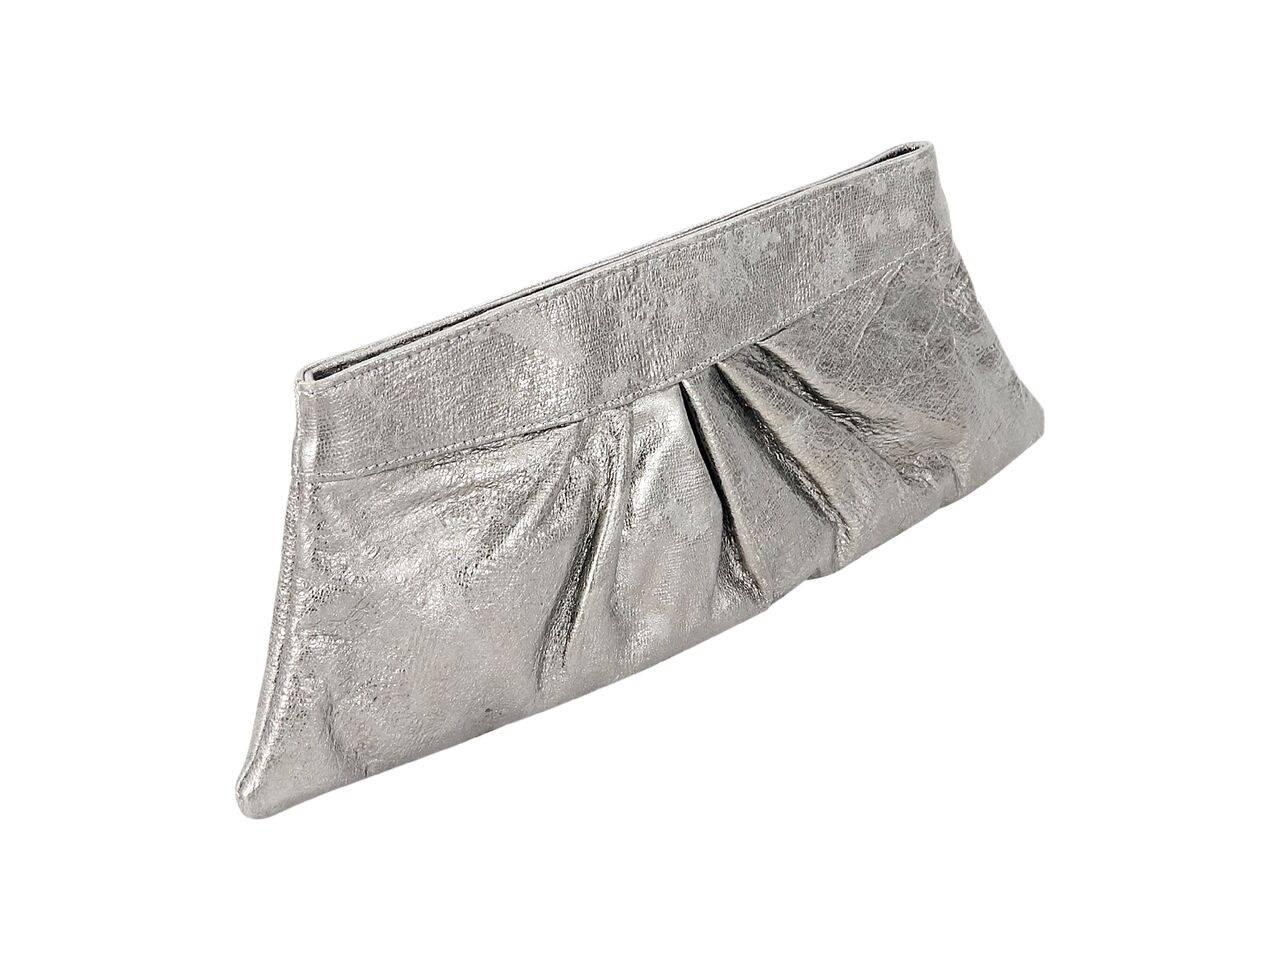 Product details:  Metallic grey leather Eve clutch by Lauren Merkin.  Hinged top closure.  Lined interior.  Front and back pleats.  12.5